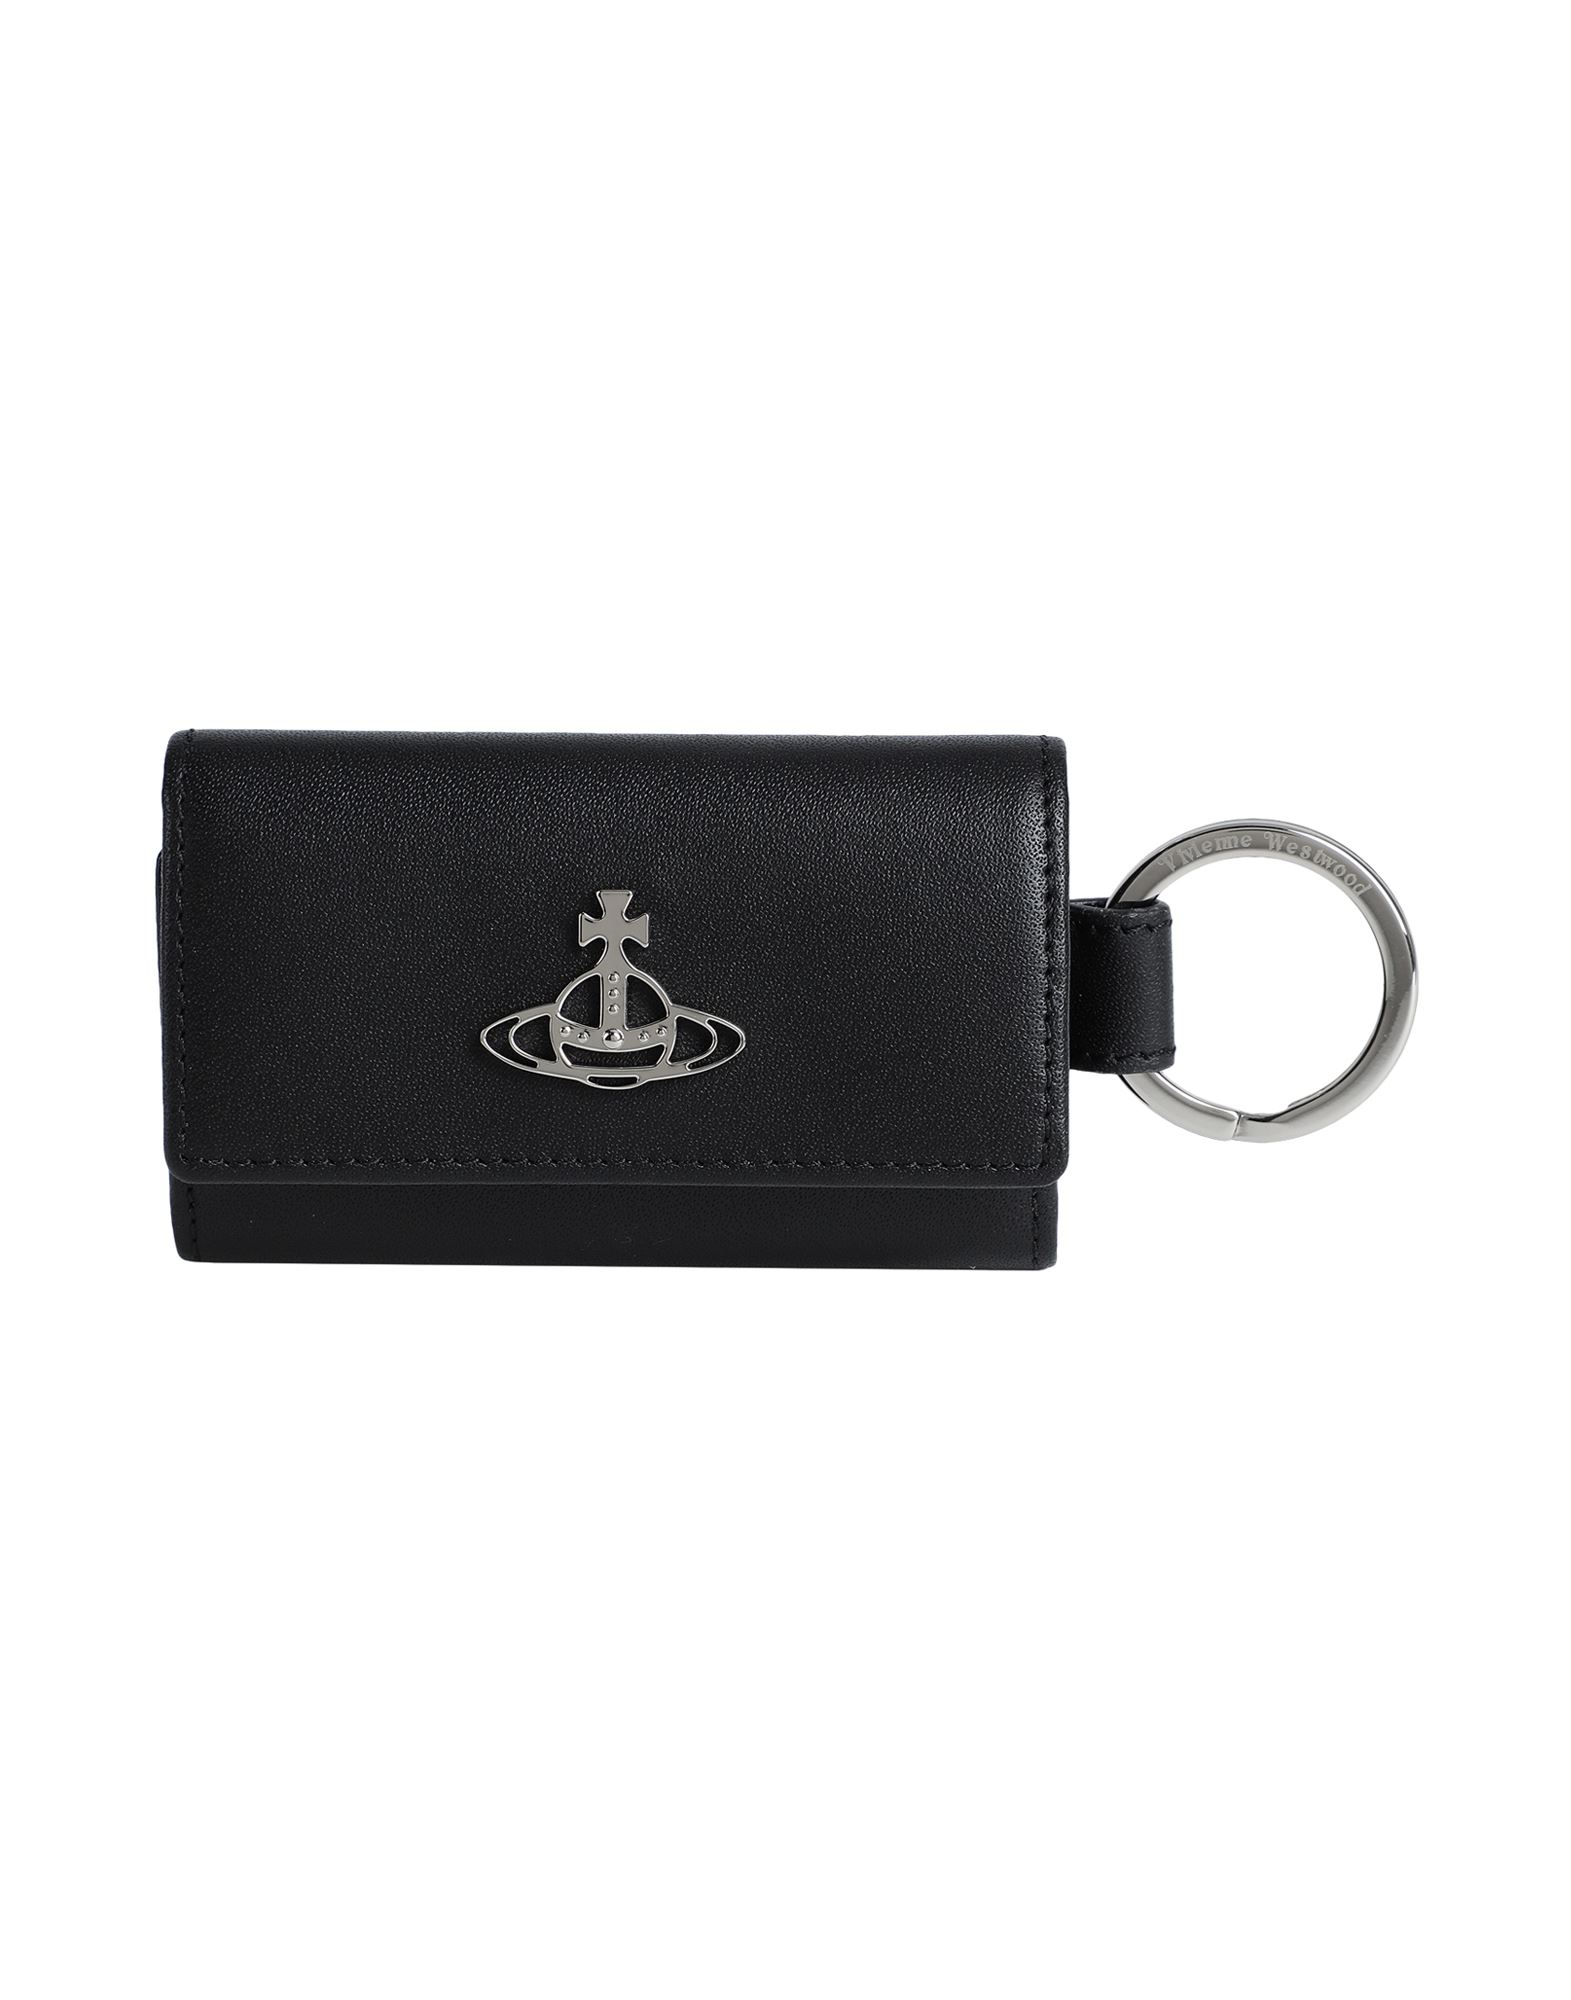 Vivienne Westwood Anglomania Orb Keyring Coin Purse Black Ostrich leather  ref.787864 - Joli Closet